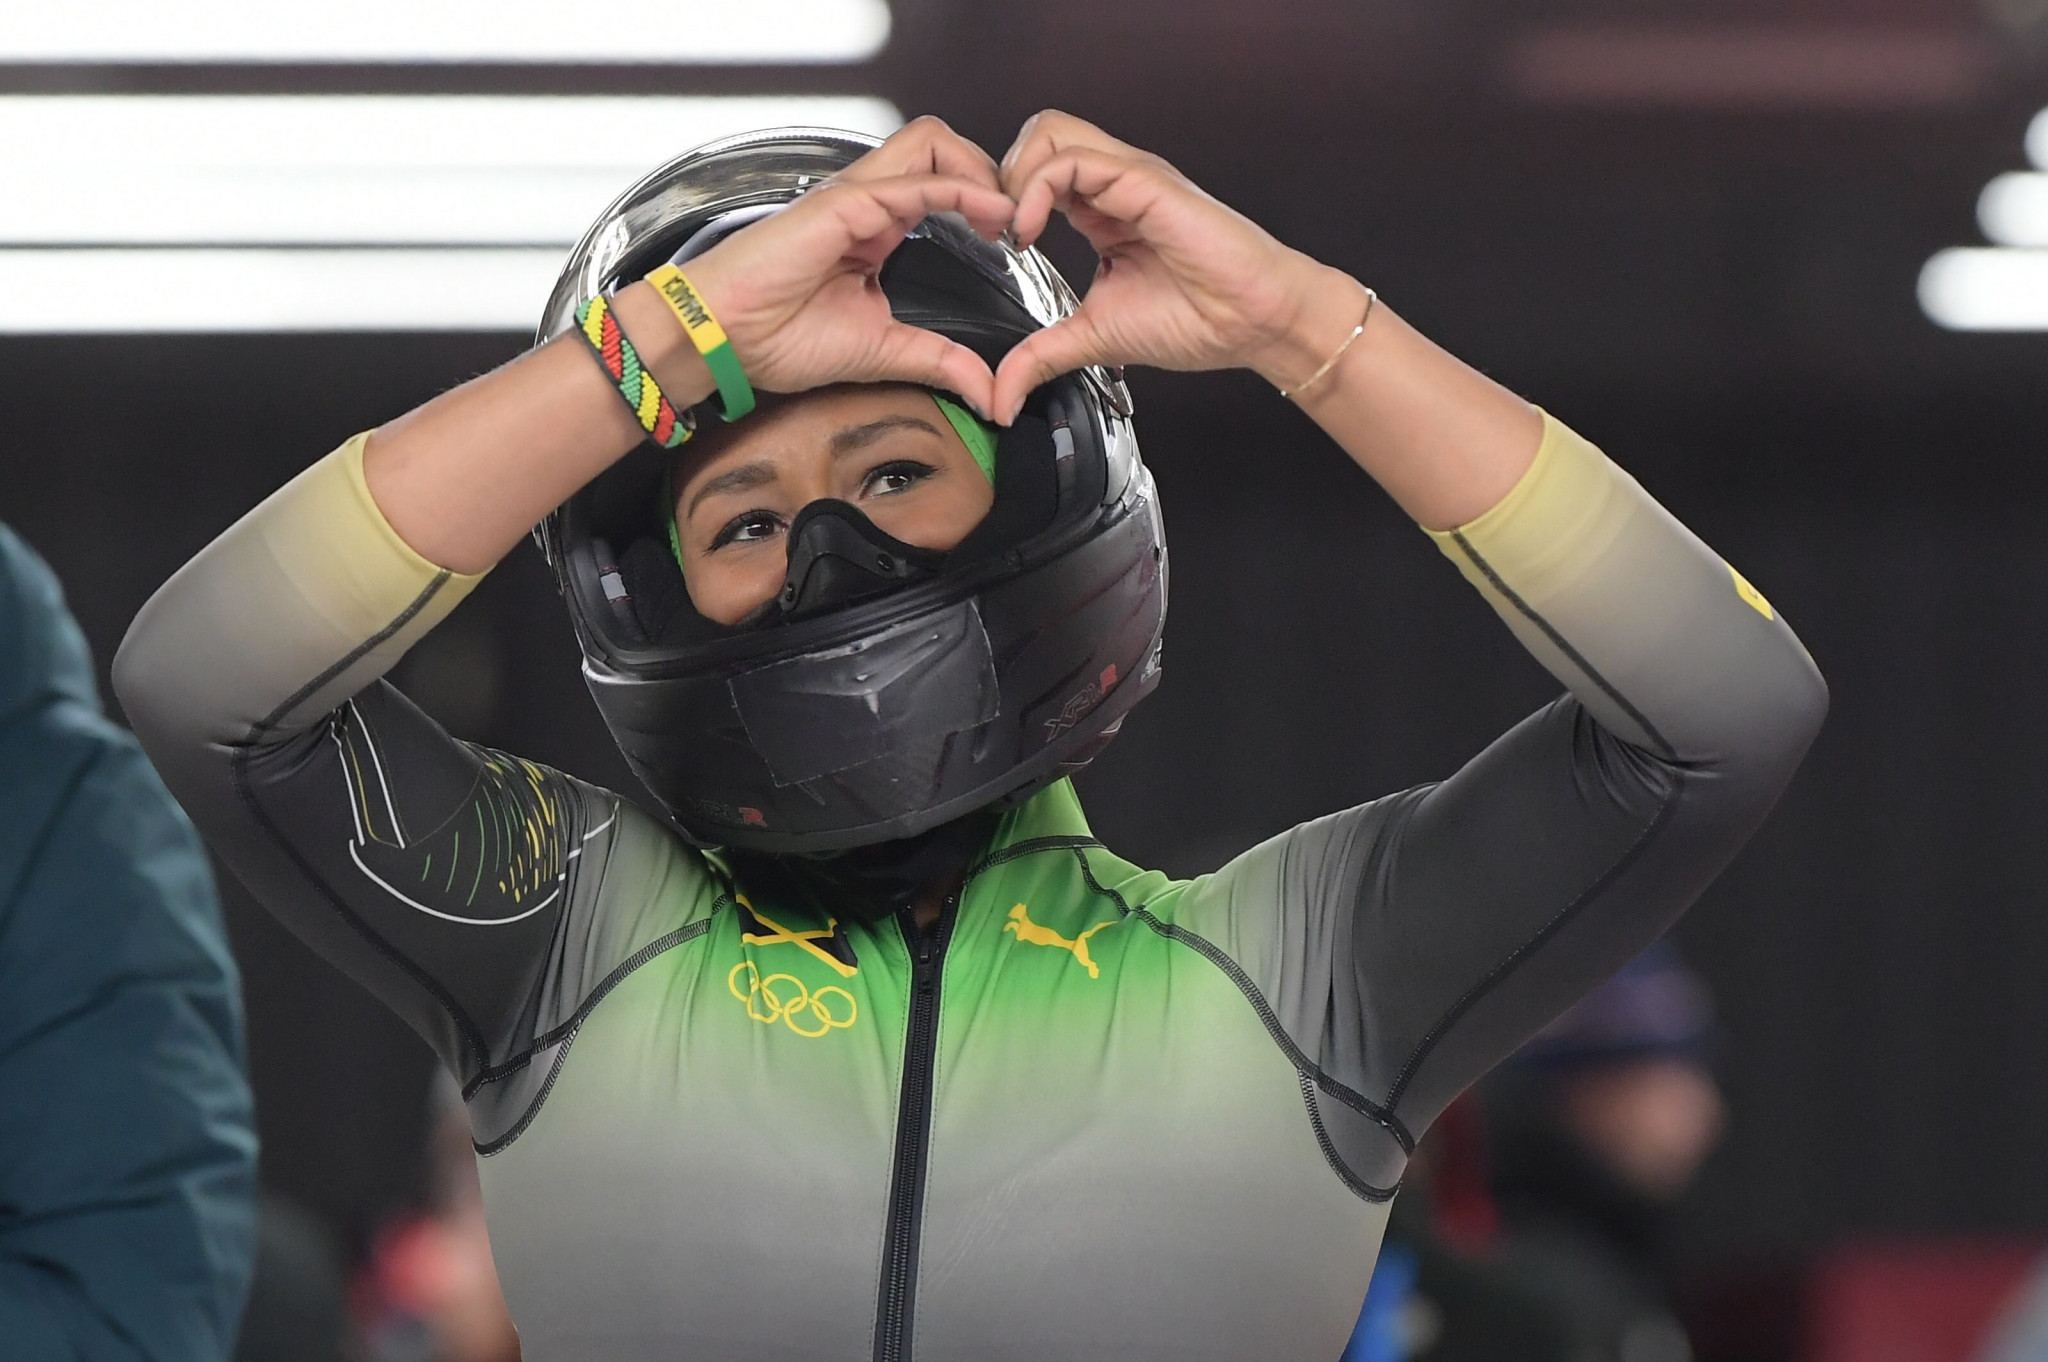 Jamaica's groundbreaking Pyeongchang 2018 bobsleigh athlete Jazmine Fenlator-Victorian has had her provisional doping ban lifted by the IBSF, it has been reported ©Getty Images